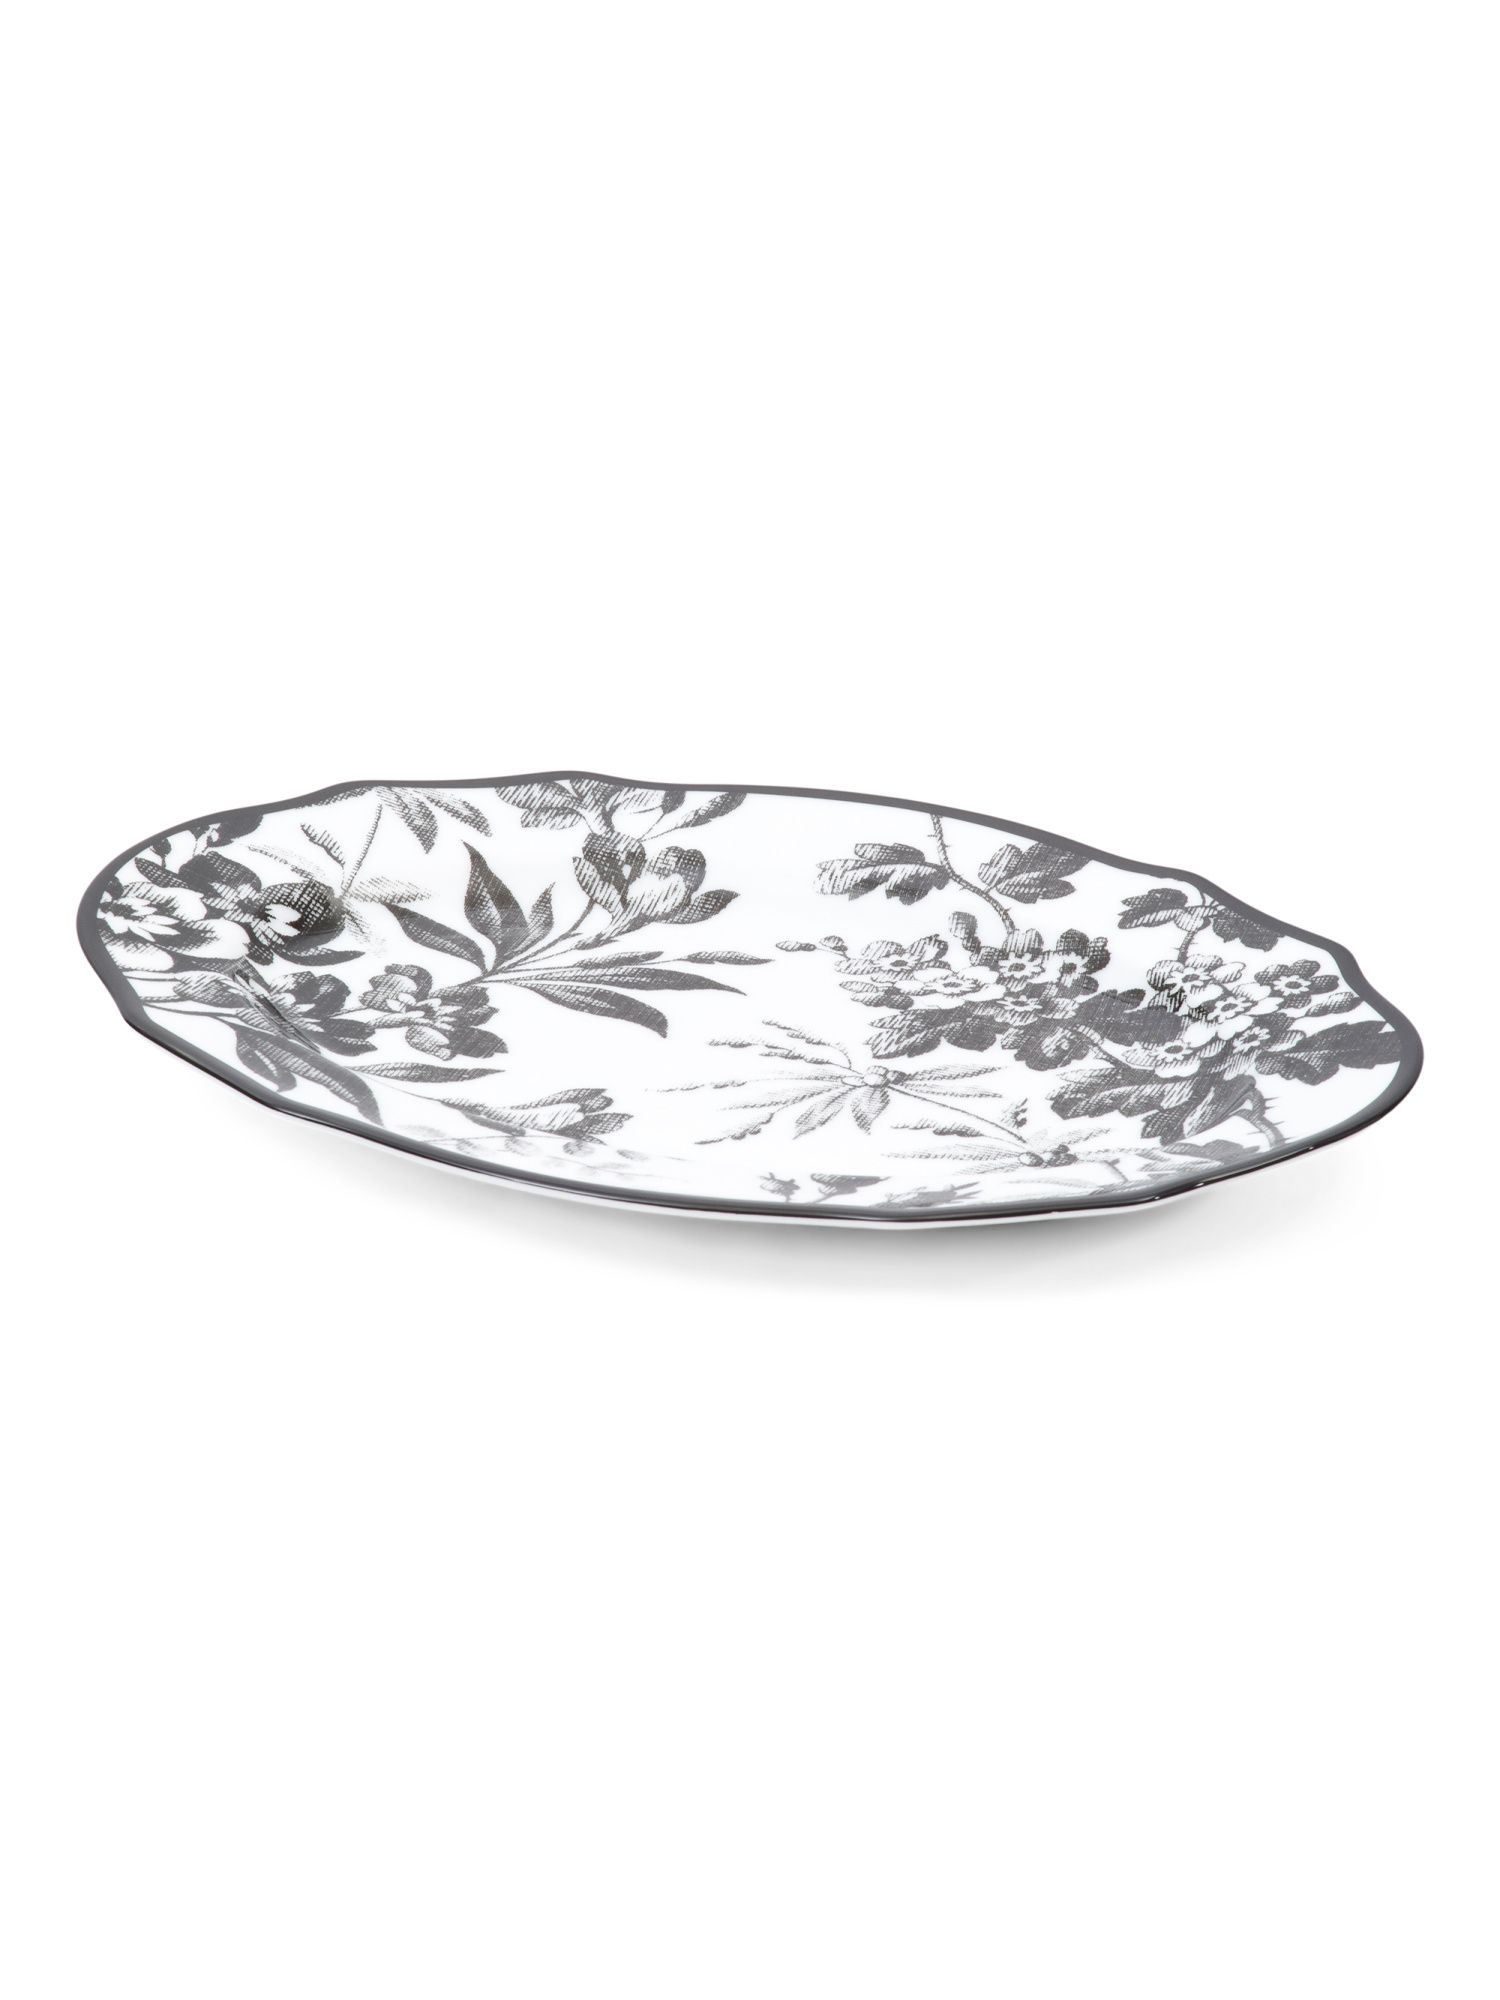 Made In Italy Porcelain Herbarium Hors Doeuvre Plate | TJ Maxx